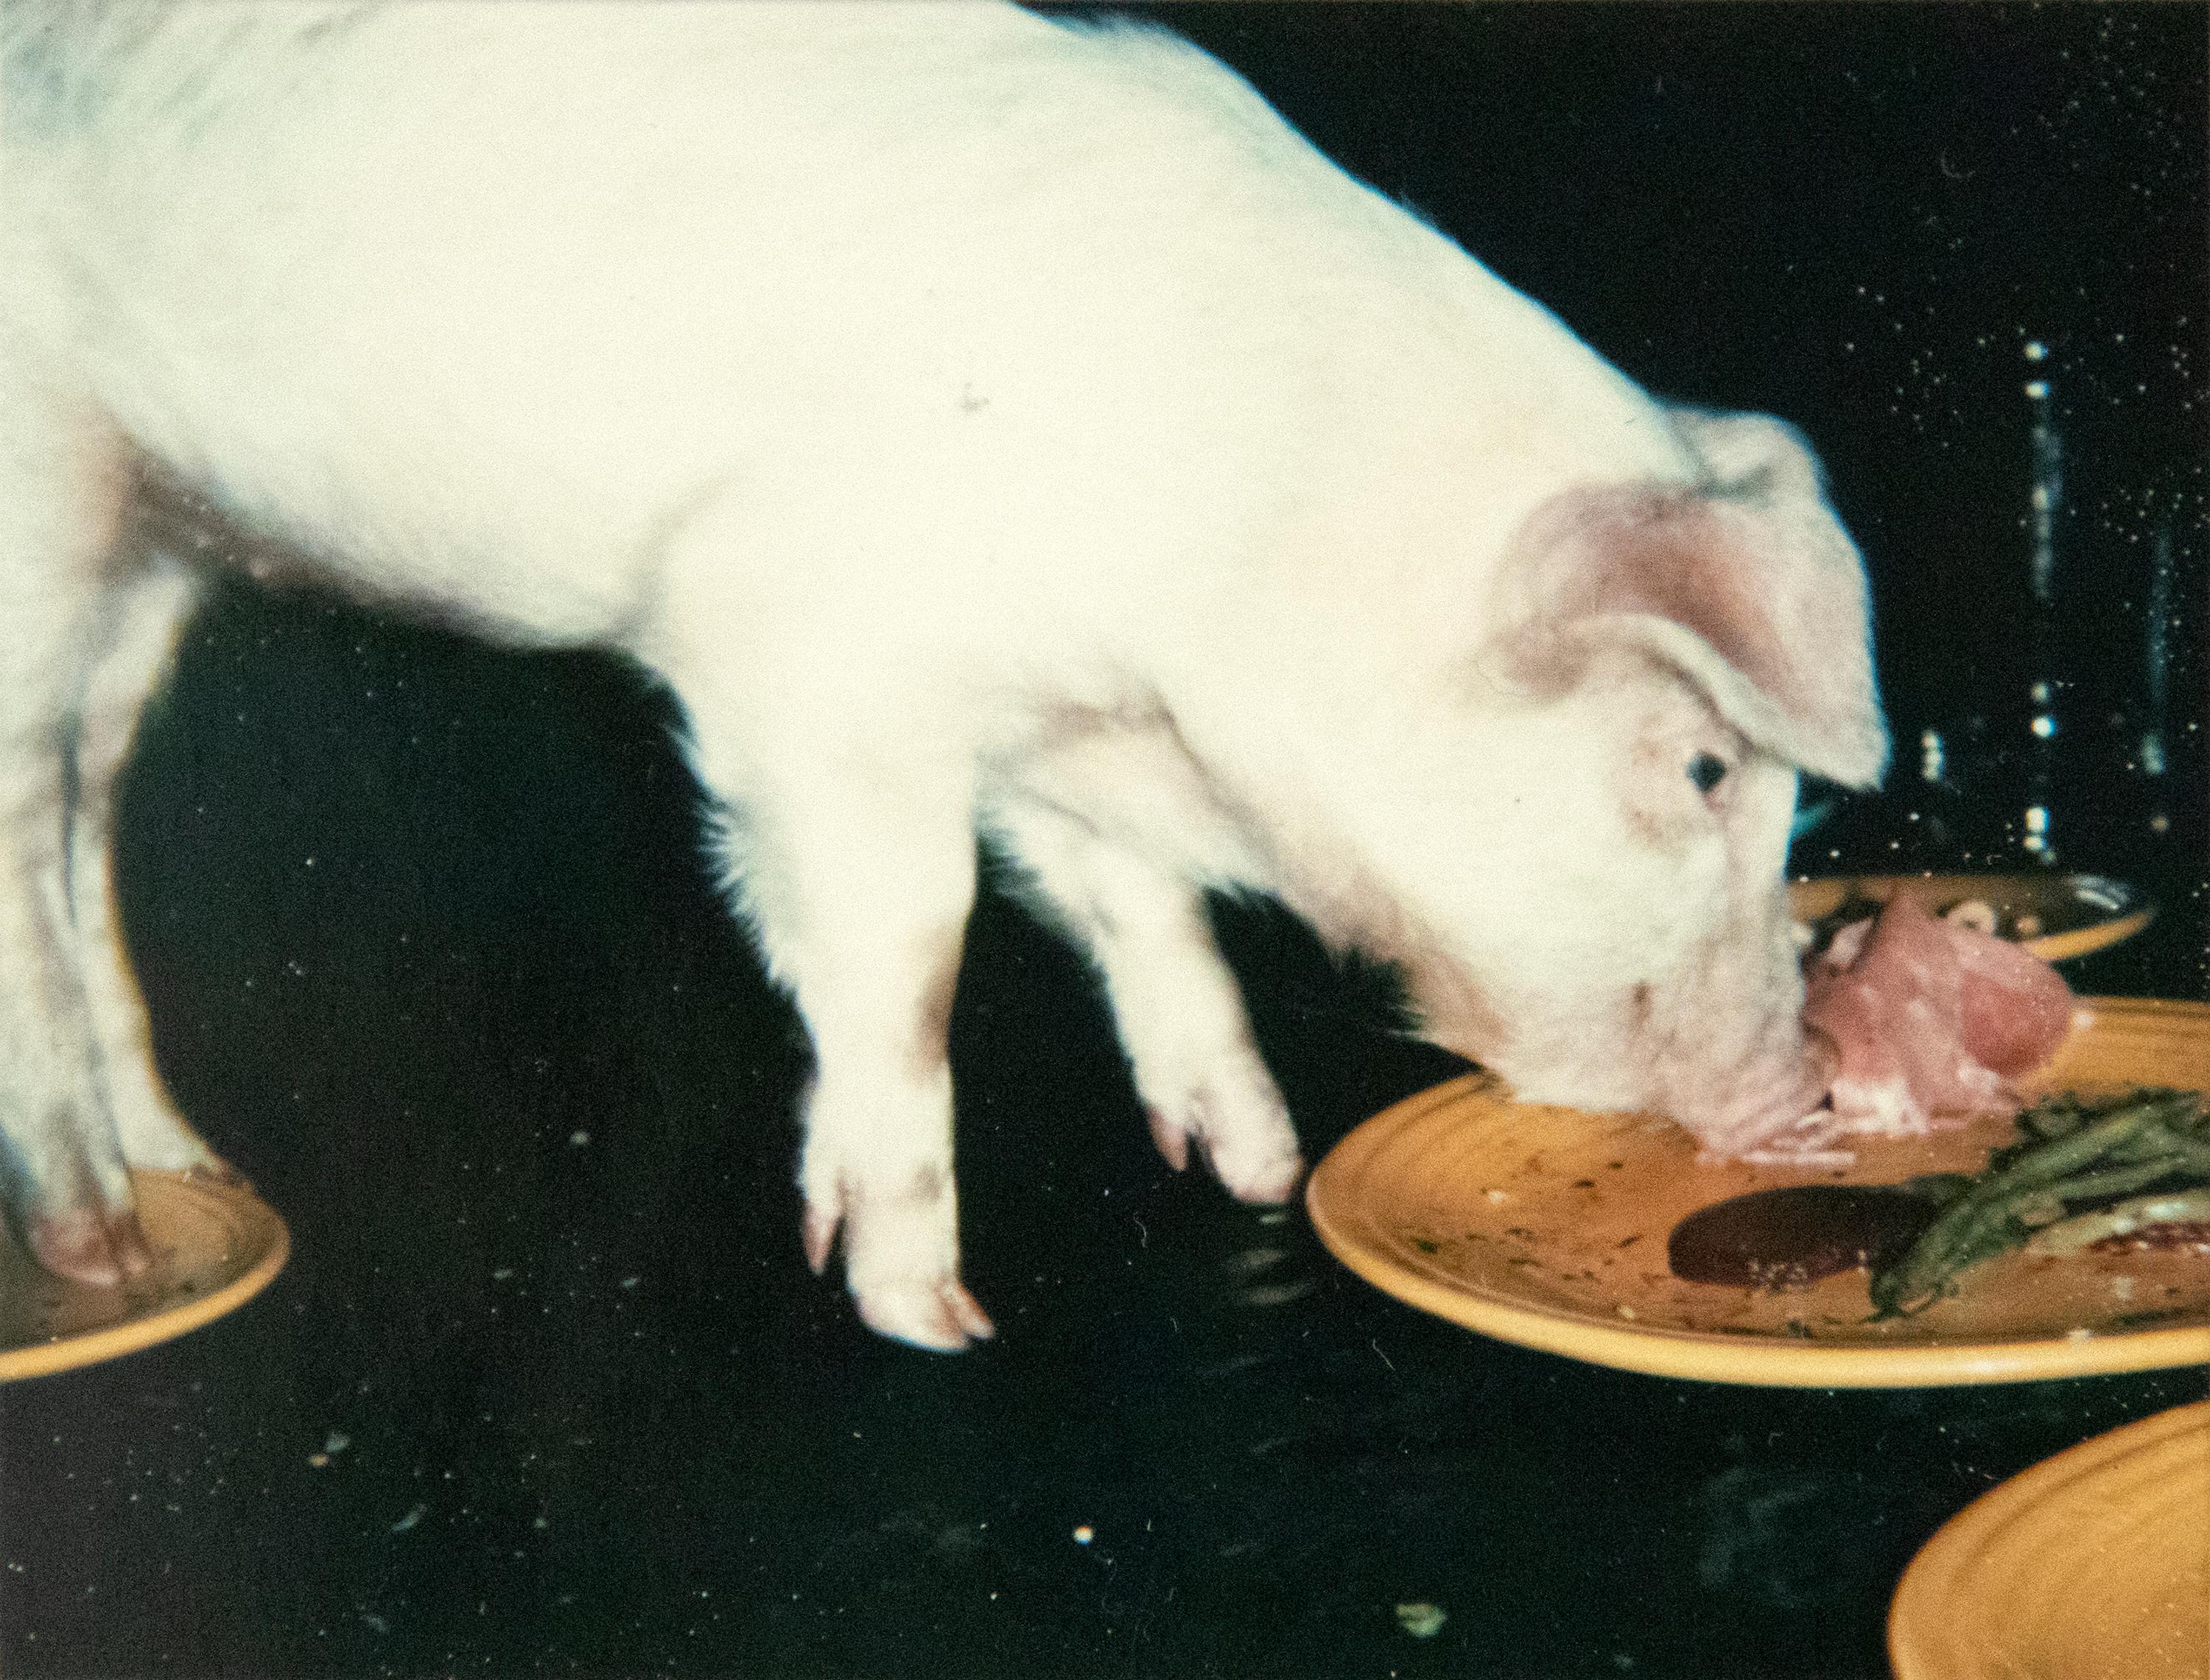 Fiesta Pigs - Photograph by Andy Warhol